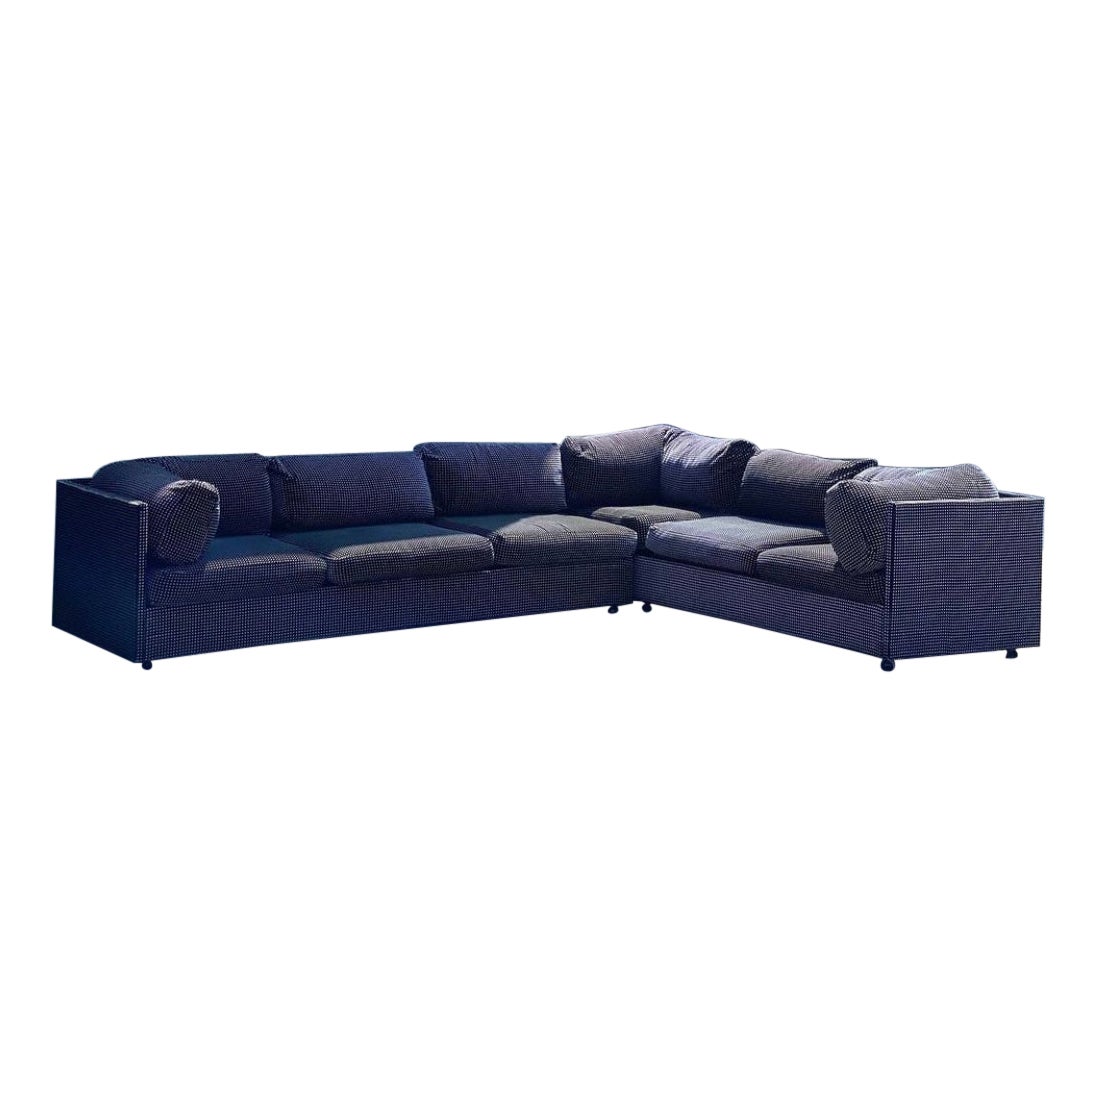 Two piece Selig Sectional Sofa by Milo Baughman - Seats Six For Sale